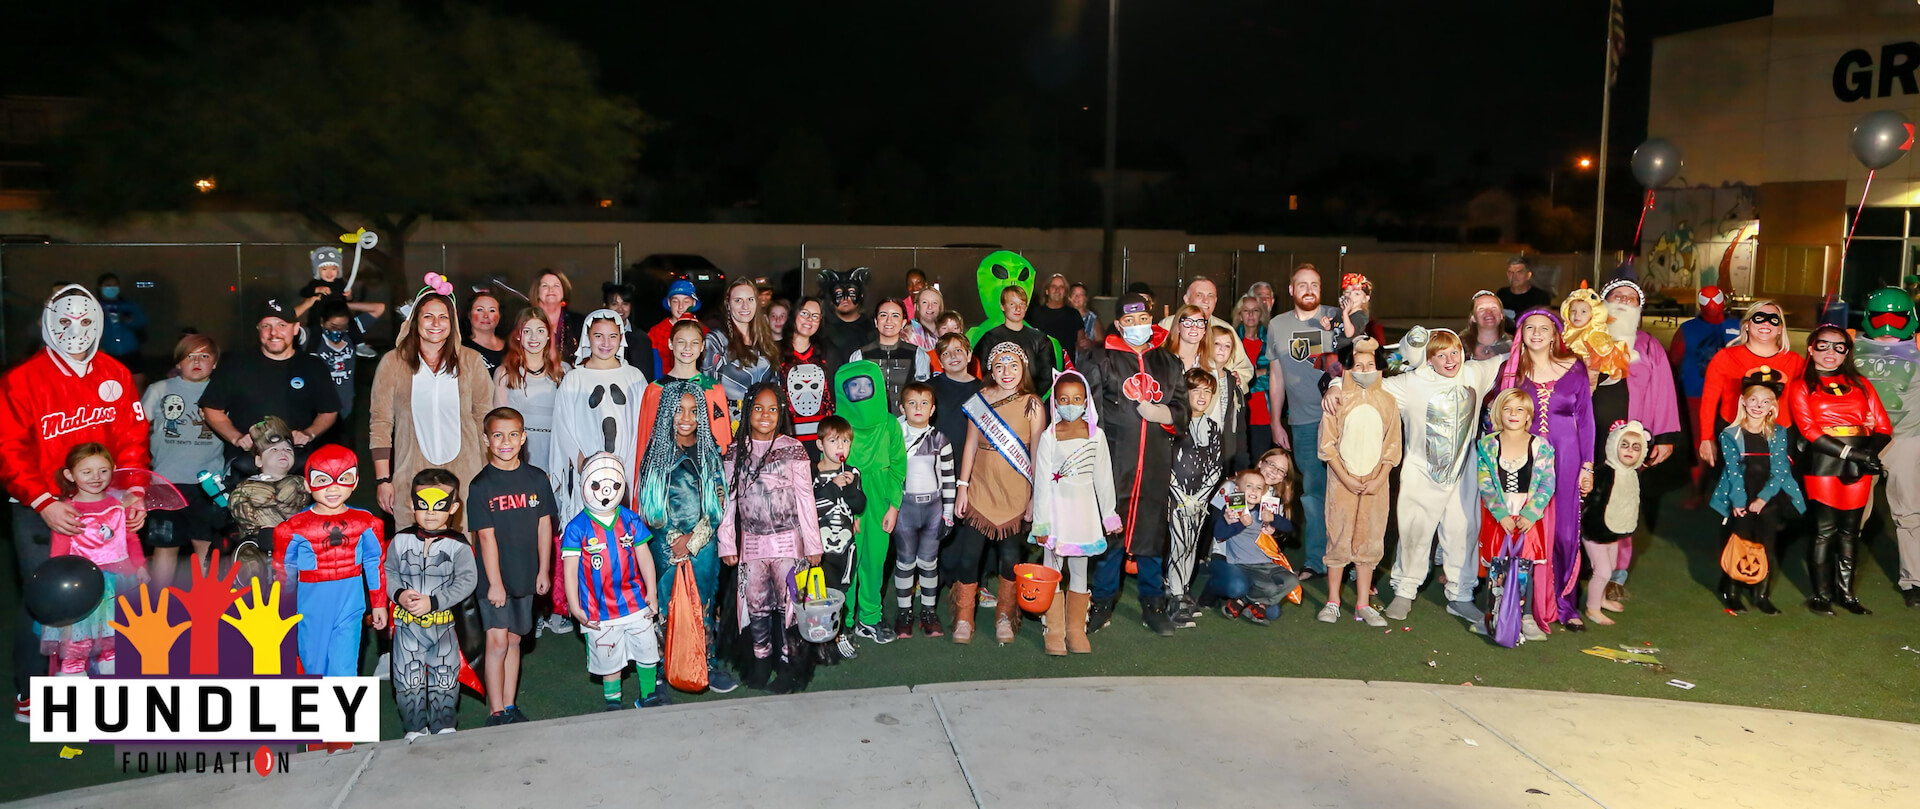 group photo of Spooktacular Halloween Party attendees